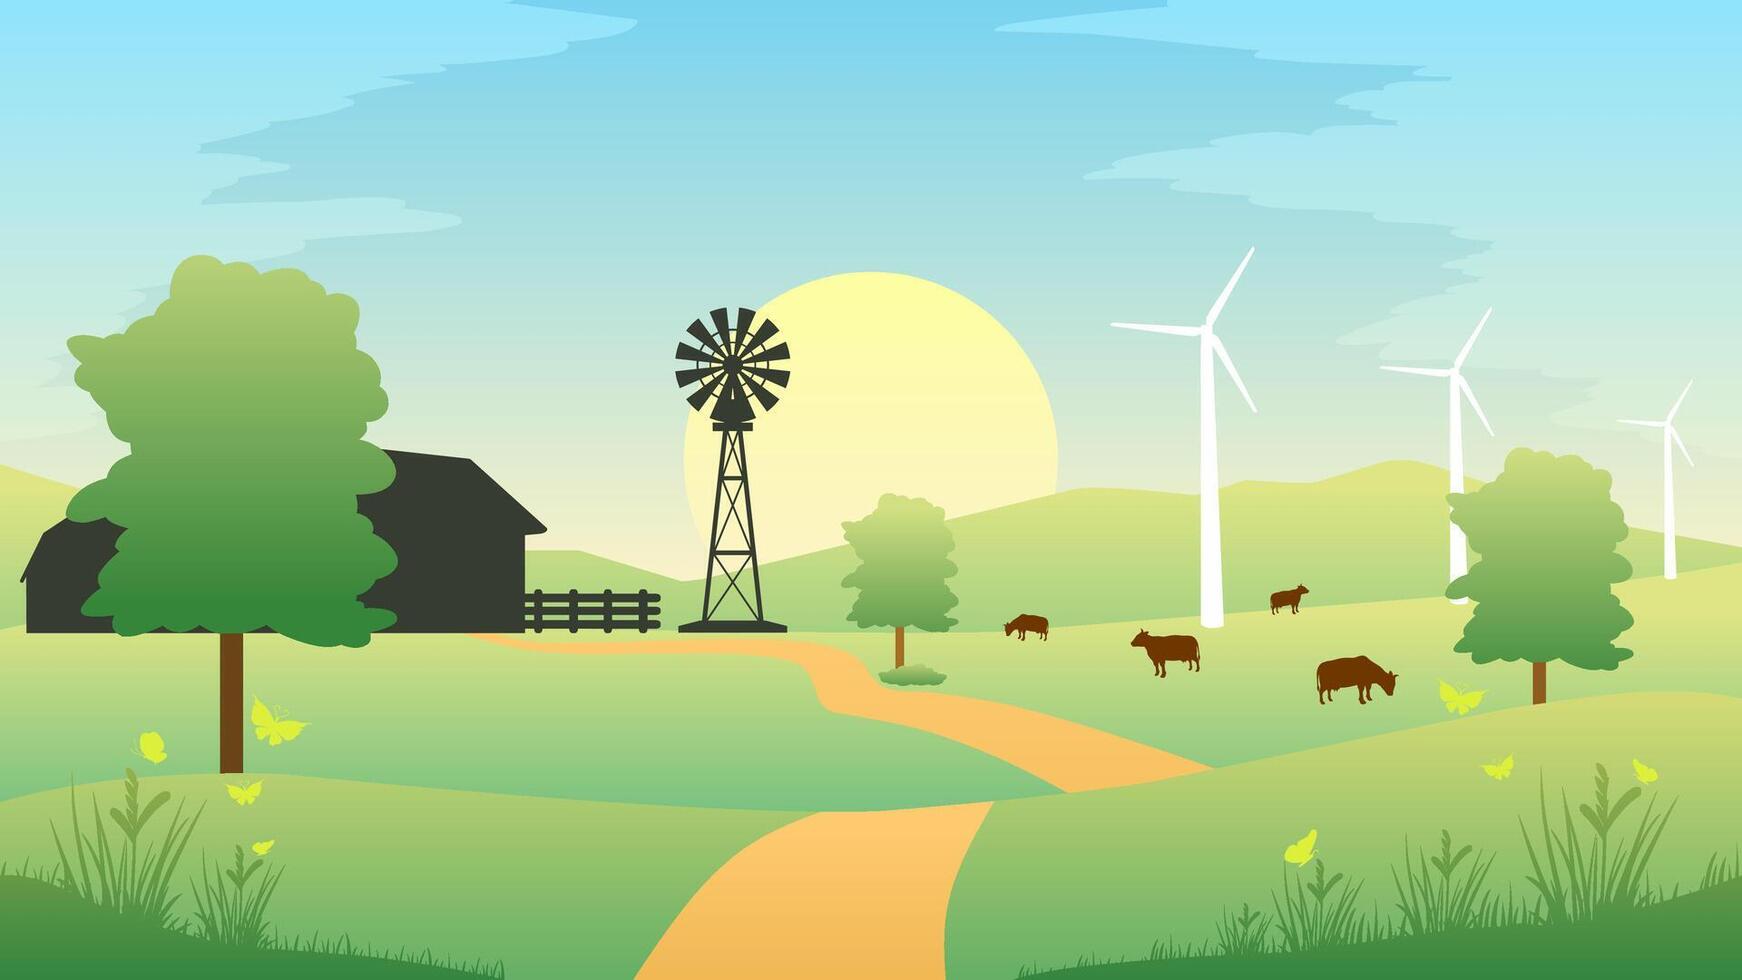 Farmland in spring season landscape vector illustration. Countryside landscape with livestock and farmhouse in spring. Rural agriculture landscape for illustration, background or wallpaper